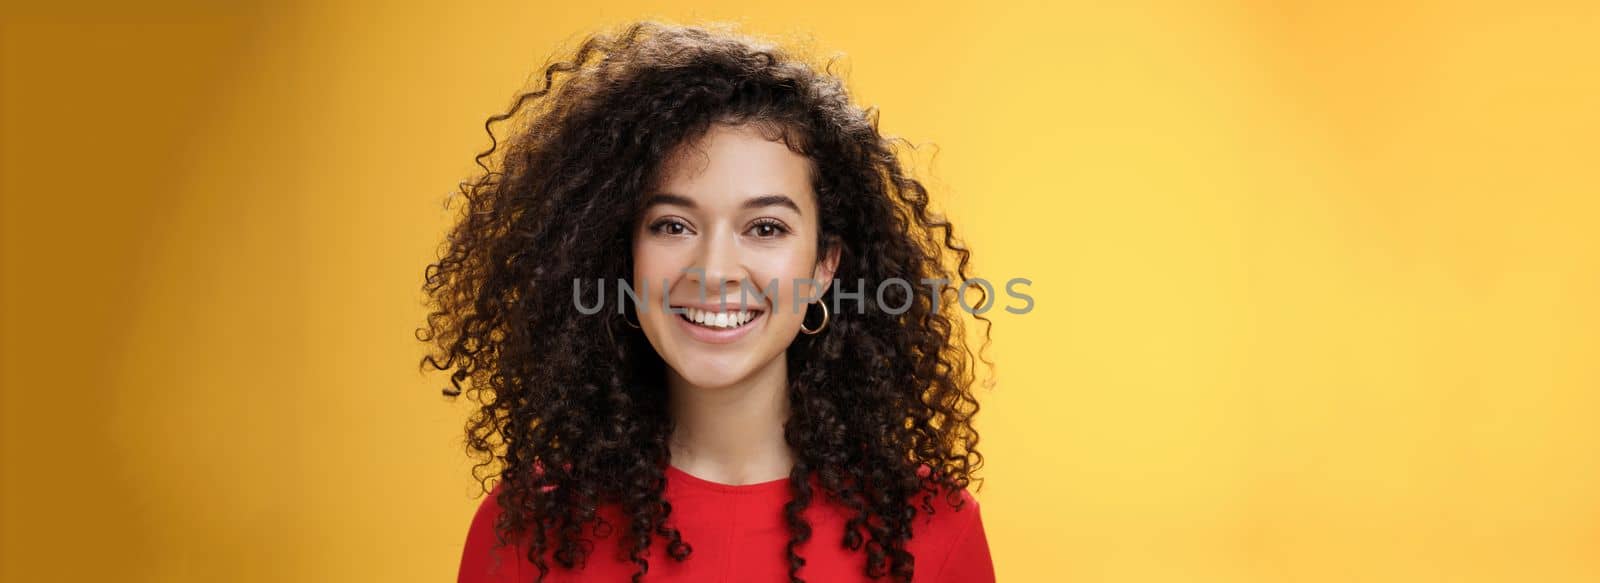 Close-up shot of pretty caucasian girl with curly hair in red dress and earrings smiling joyfully with pleased hopeful expression gazing at camera carefree, posing over yellow background.